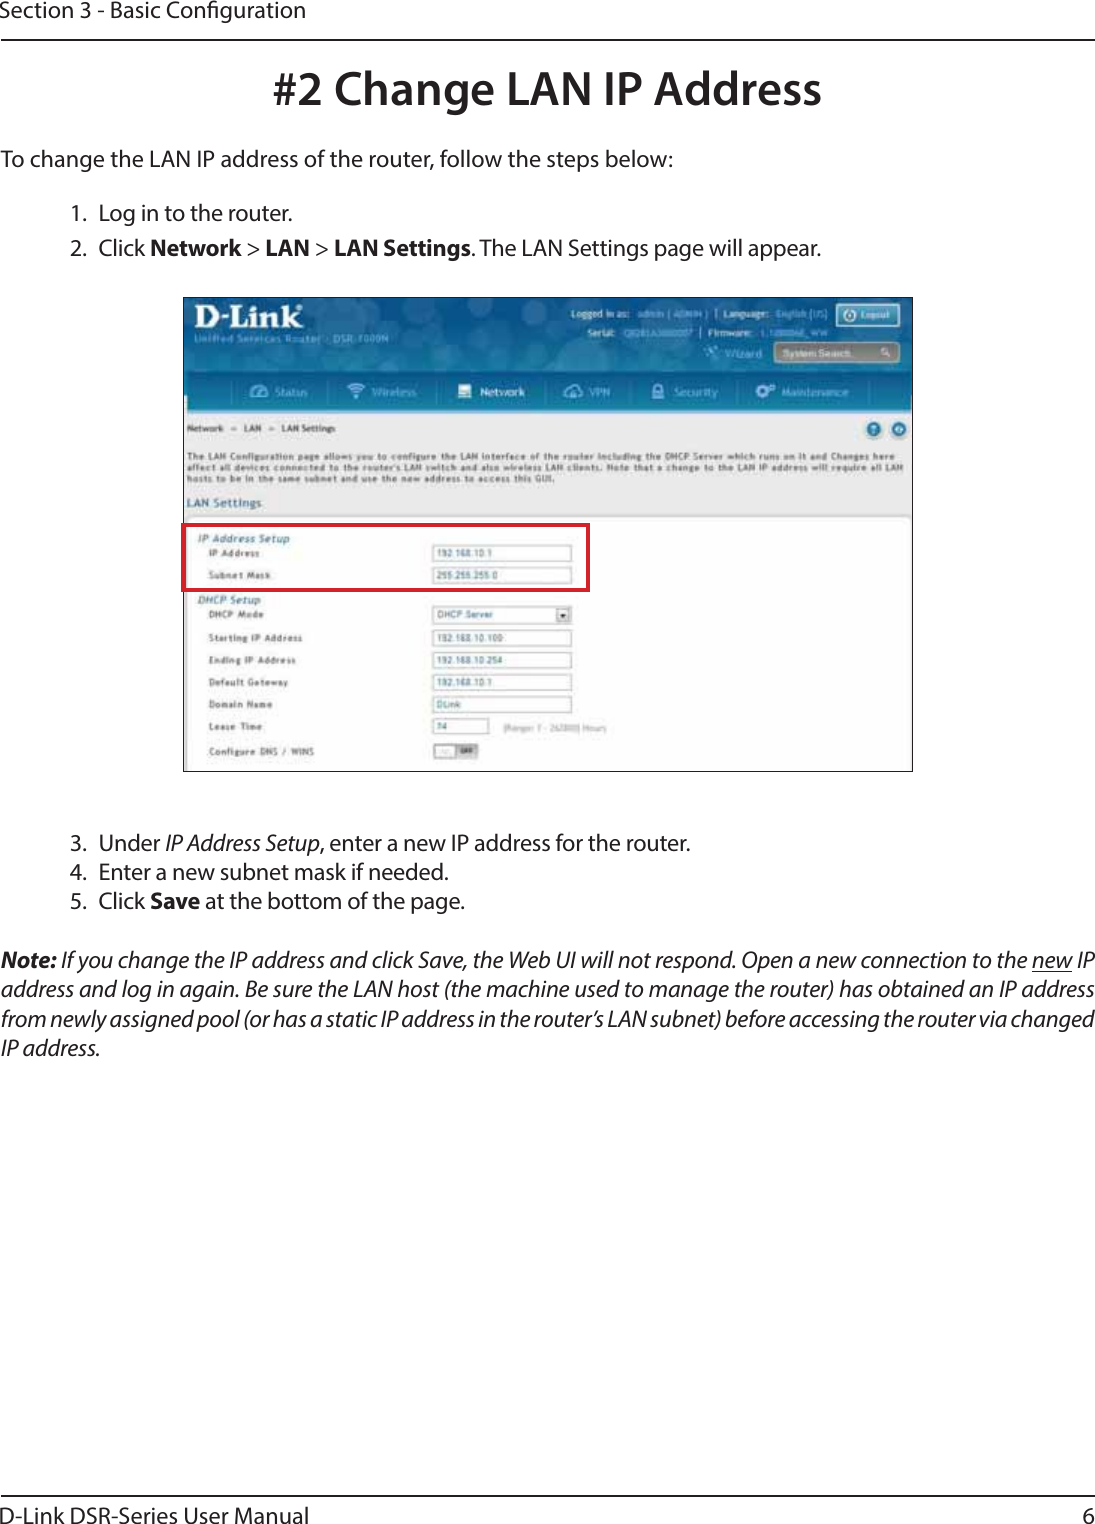 D-Link DSR-Series User Manual 6Section 3 - Basic Conguration#2 Change LAN IP Address1.  Log in to the router.2. Click Network &gt; LAN &gt; LAN Settings. The LAN Settings page will appear.To change the LAN IP address of the router, follow the steps below:Note: If you change the IP address and click Save, the Web UI will not respond. Open a new connection to the new IP address and log in again. Be sure the LAN host (the machine used to manage the router) has obtained an IP address from newly assigned pool (or has a static IP address in the router’s LAN subnet) before accessing the router via changed IP address.3. Under IP Address Setup, enter a new IP address for the router.4.  Enter a new subnet mask if needed.5. Click Save at the bottom of the page.